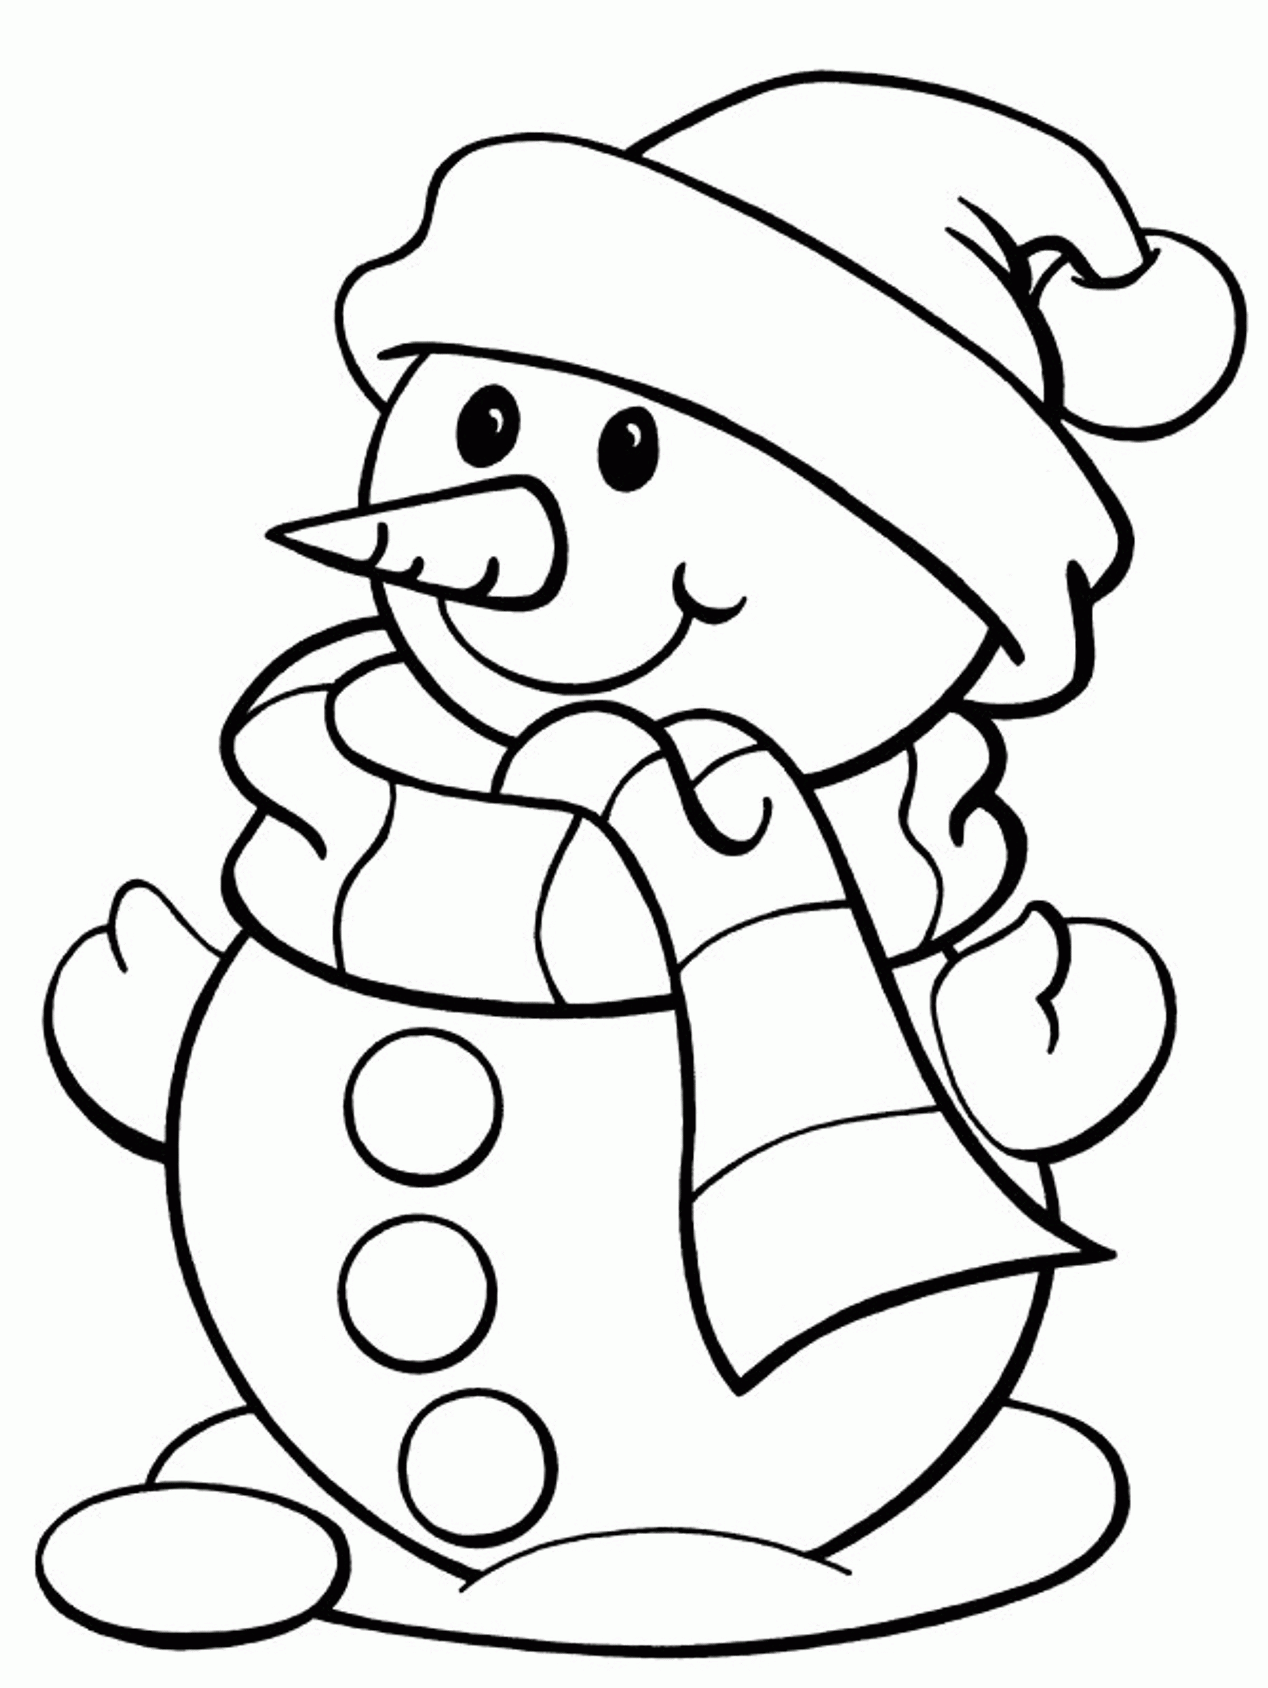 Winter Coloring Worksheets For Kindergarten - The Largest and Most